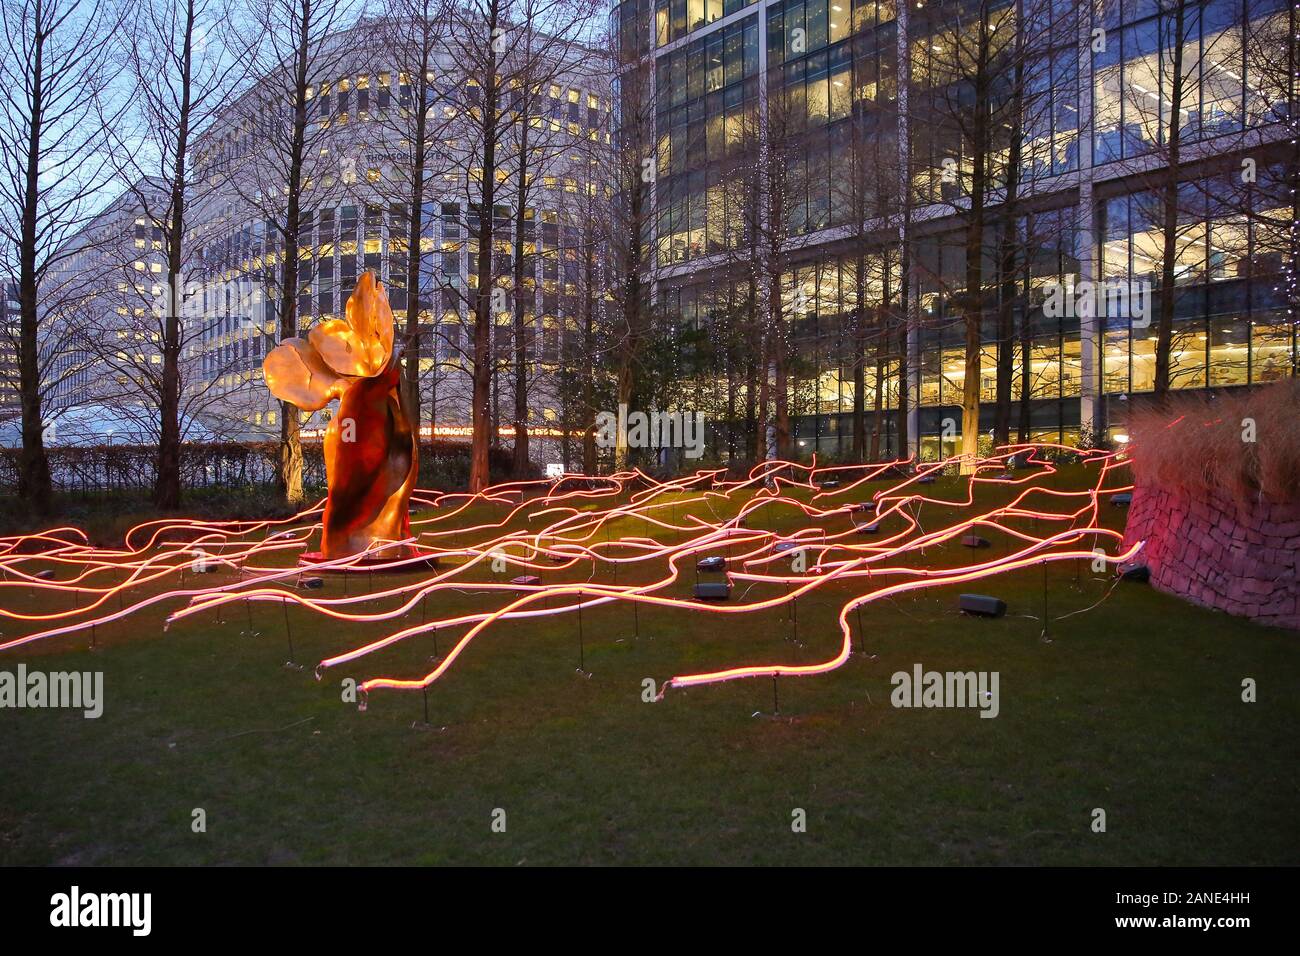 Squiggle art installation is seen during the opening day of the Canary Wharf Winter Light Festival in Docklands, London. The festival is open to public daily from 4pm to 10pm until 25 January 2020. Squiggle is a winding mass of 450 metres of digital neon tubing twisting and turning to fill Jubilee Park. This unique sensory journey is created by the artist's innovative manipulation of space and sense. Interact with the installation, an abstract reflection of this very multicultural world we live in by viewing it from all its different angles as you venture through the park. Stock Photo